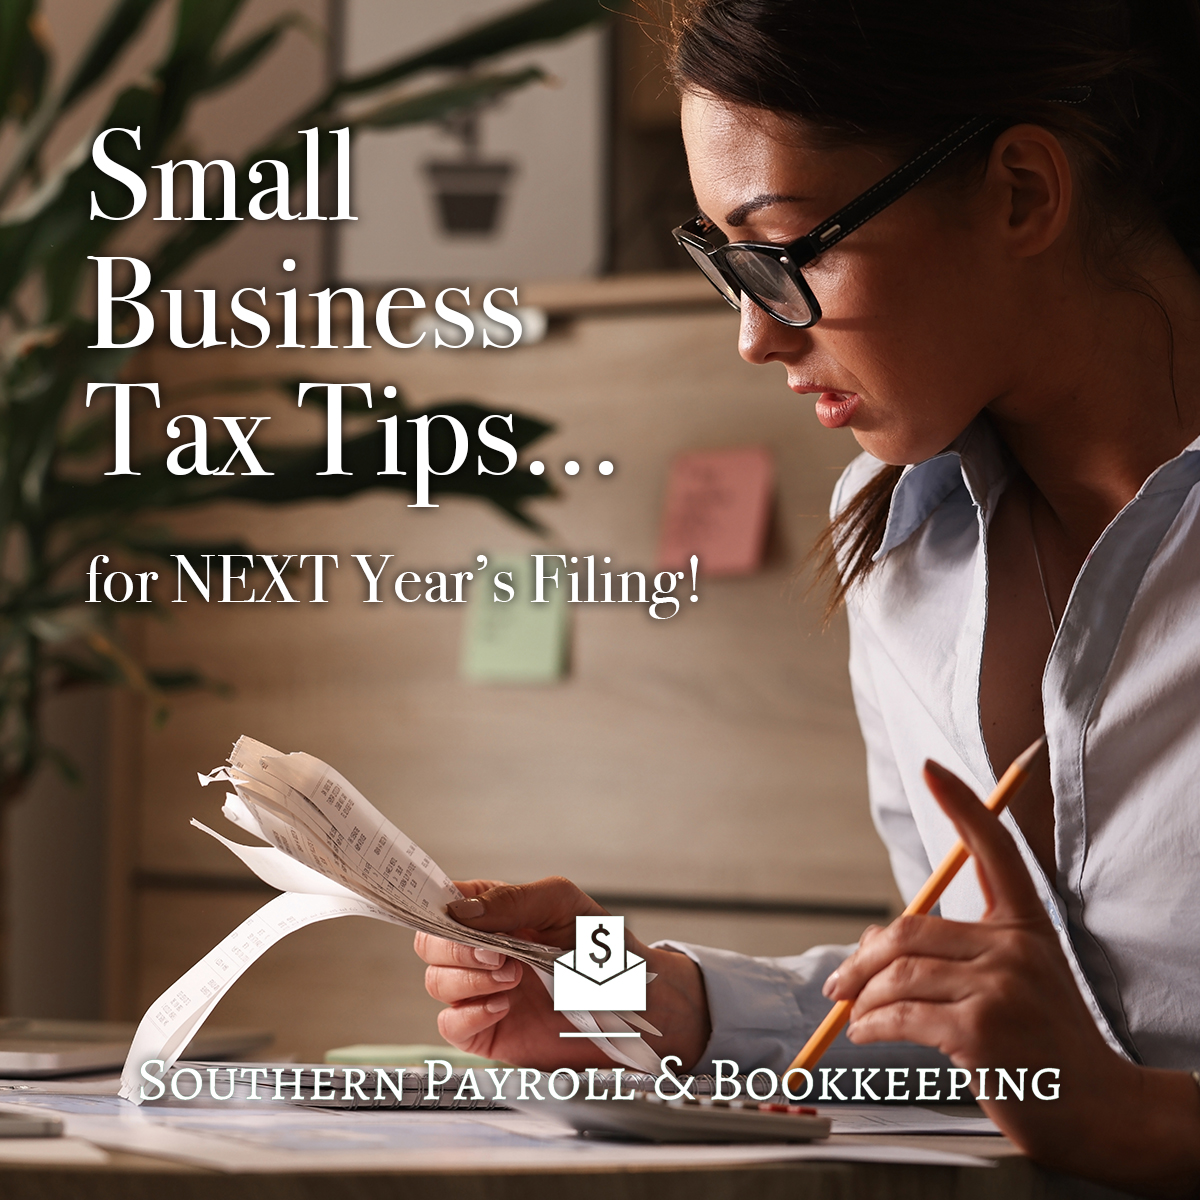 Small Business Tax Tips for NEXT Year’s Filing!